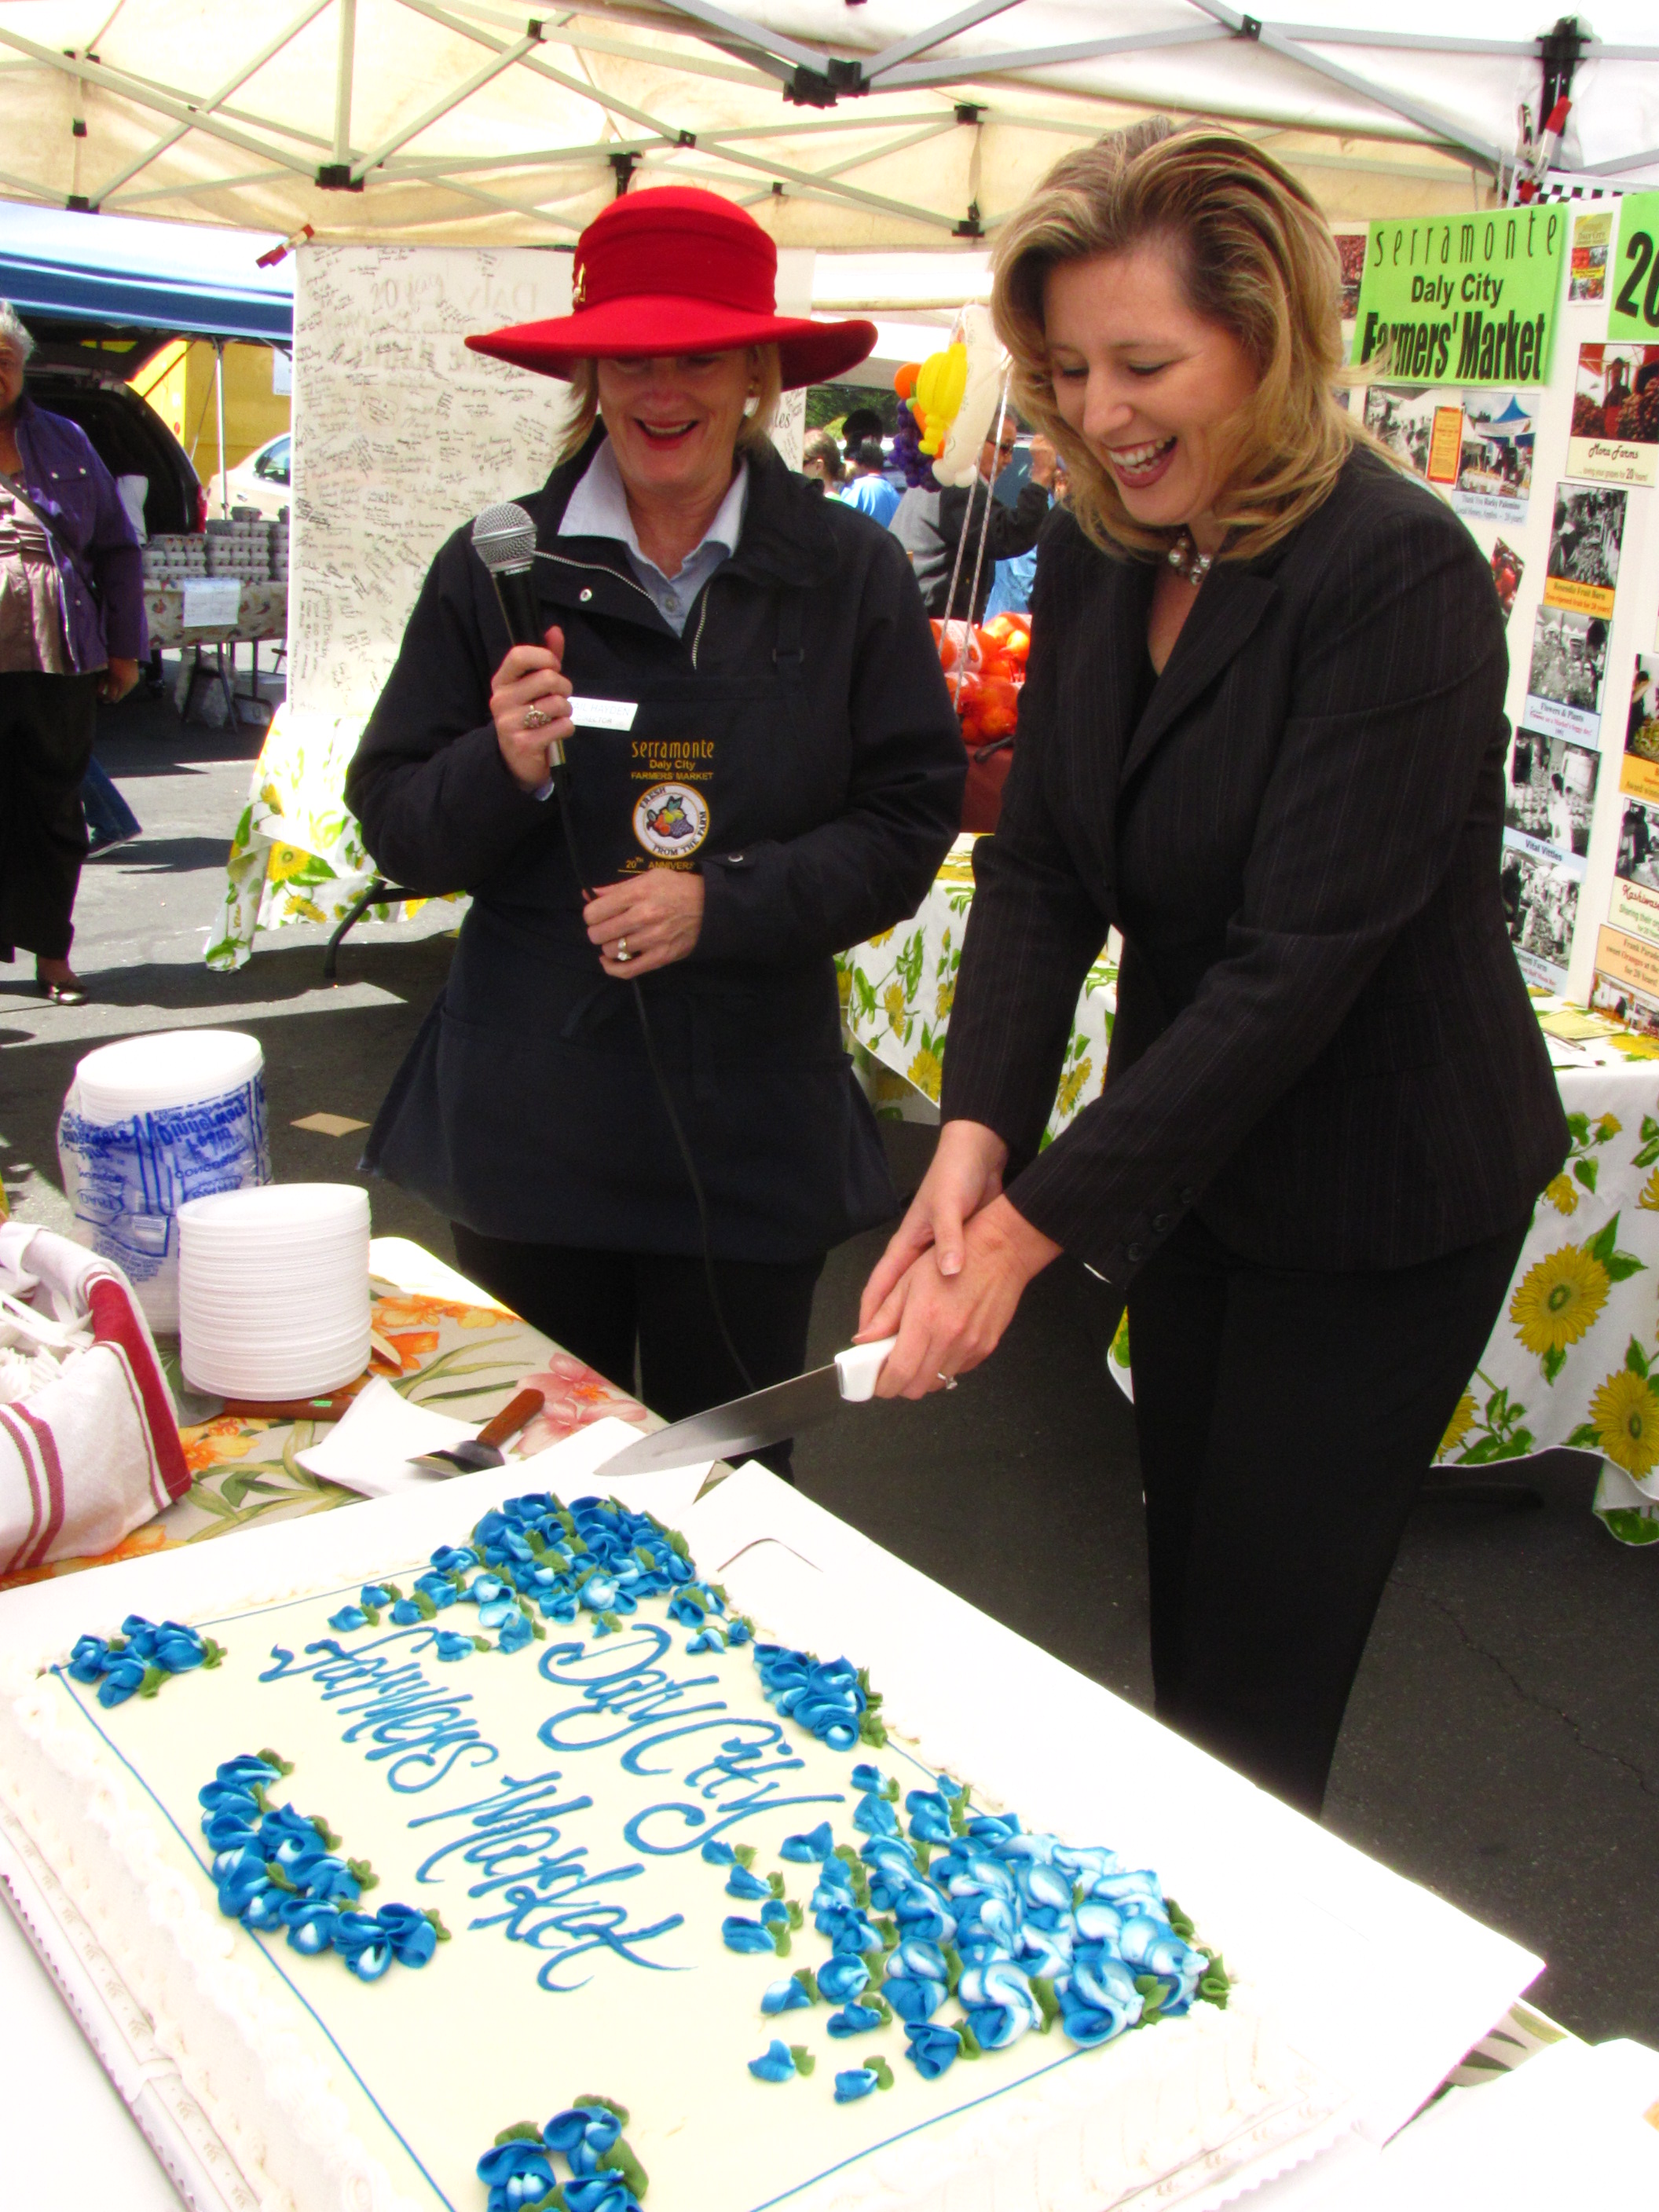 Daly City 20th Anniversary 2011 Cake cutting with Jennifer Duarte and Gail Hayden.JPG